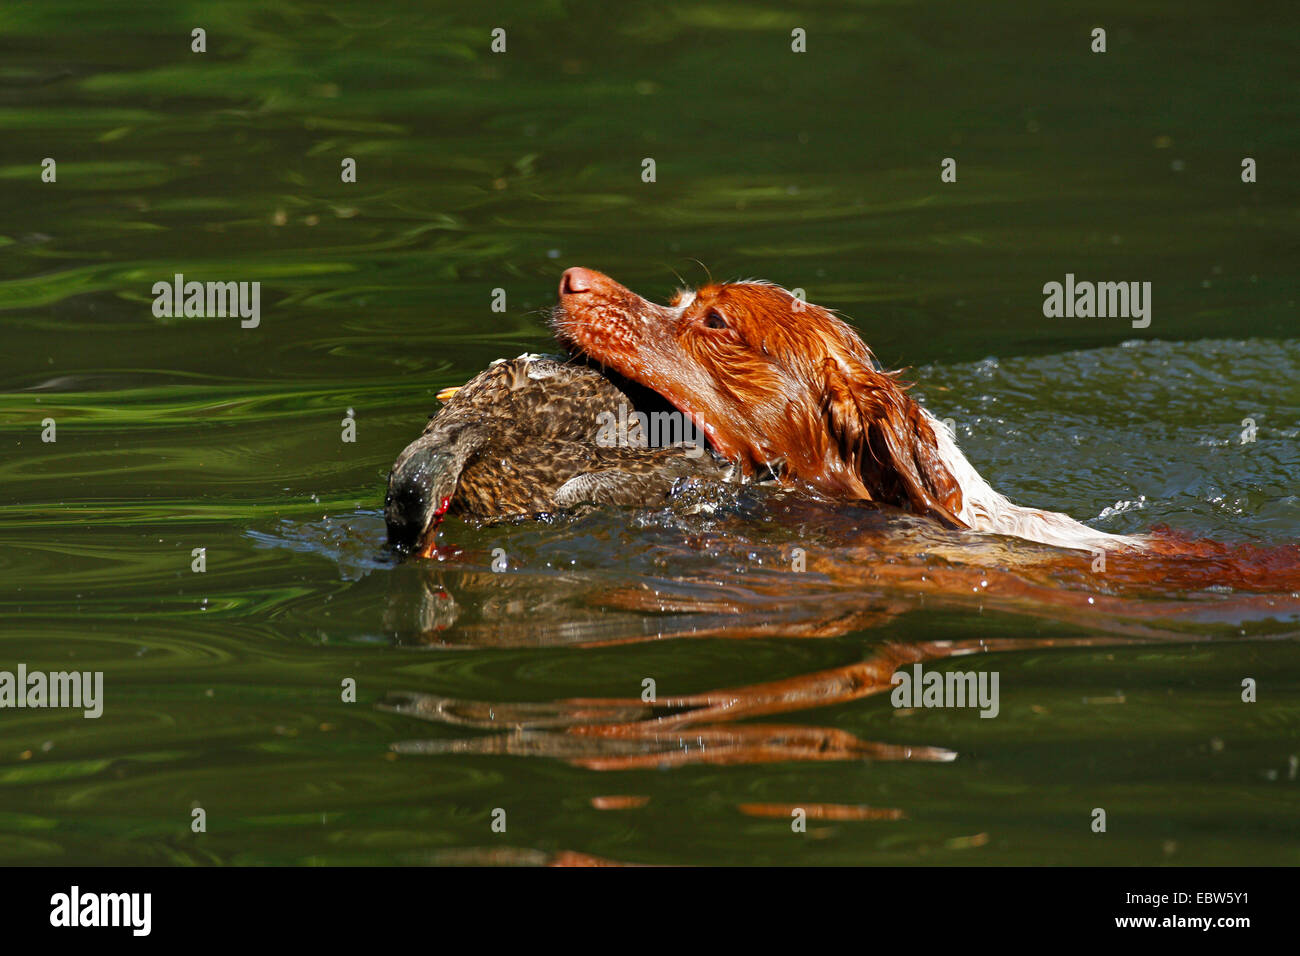 Brittany (Canis lupus f. familiaris), hunting dog swimming and retrieving a shot duck, Germany Stock Photo